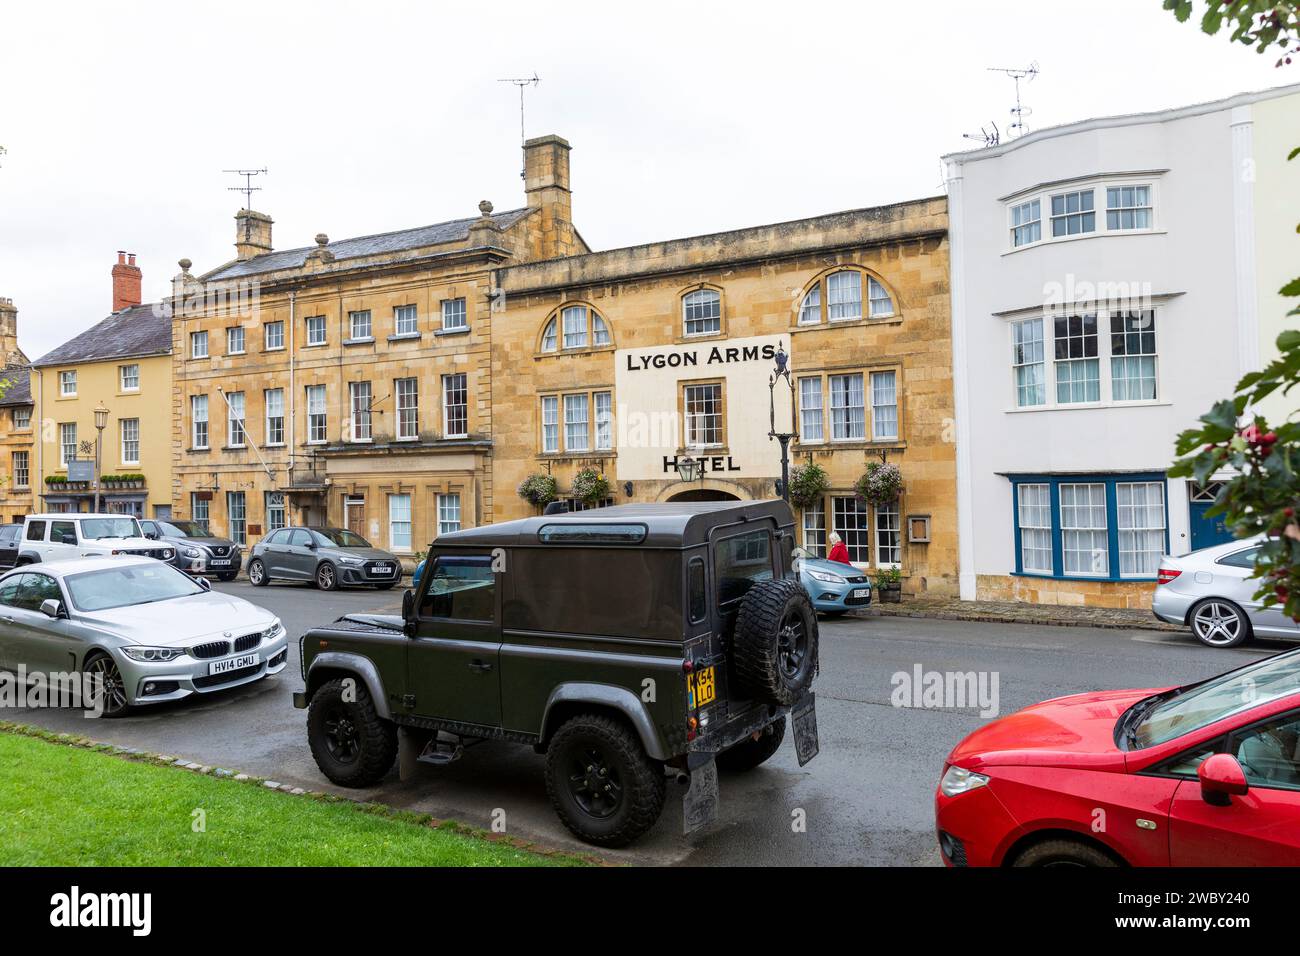 Chipping Campden town centre, Lygon Arms Hotel on high street with green Land Rover Defender parked across the road,Cotswolds,England,UK Stock Photo